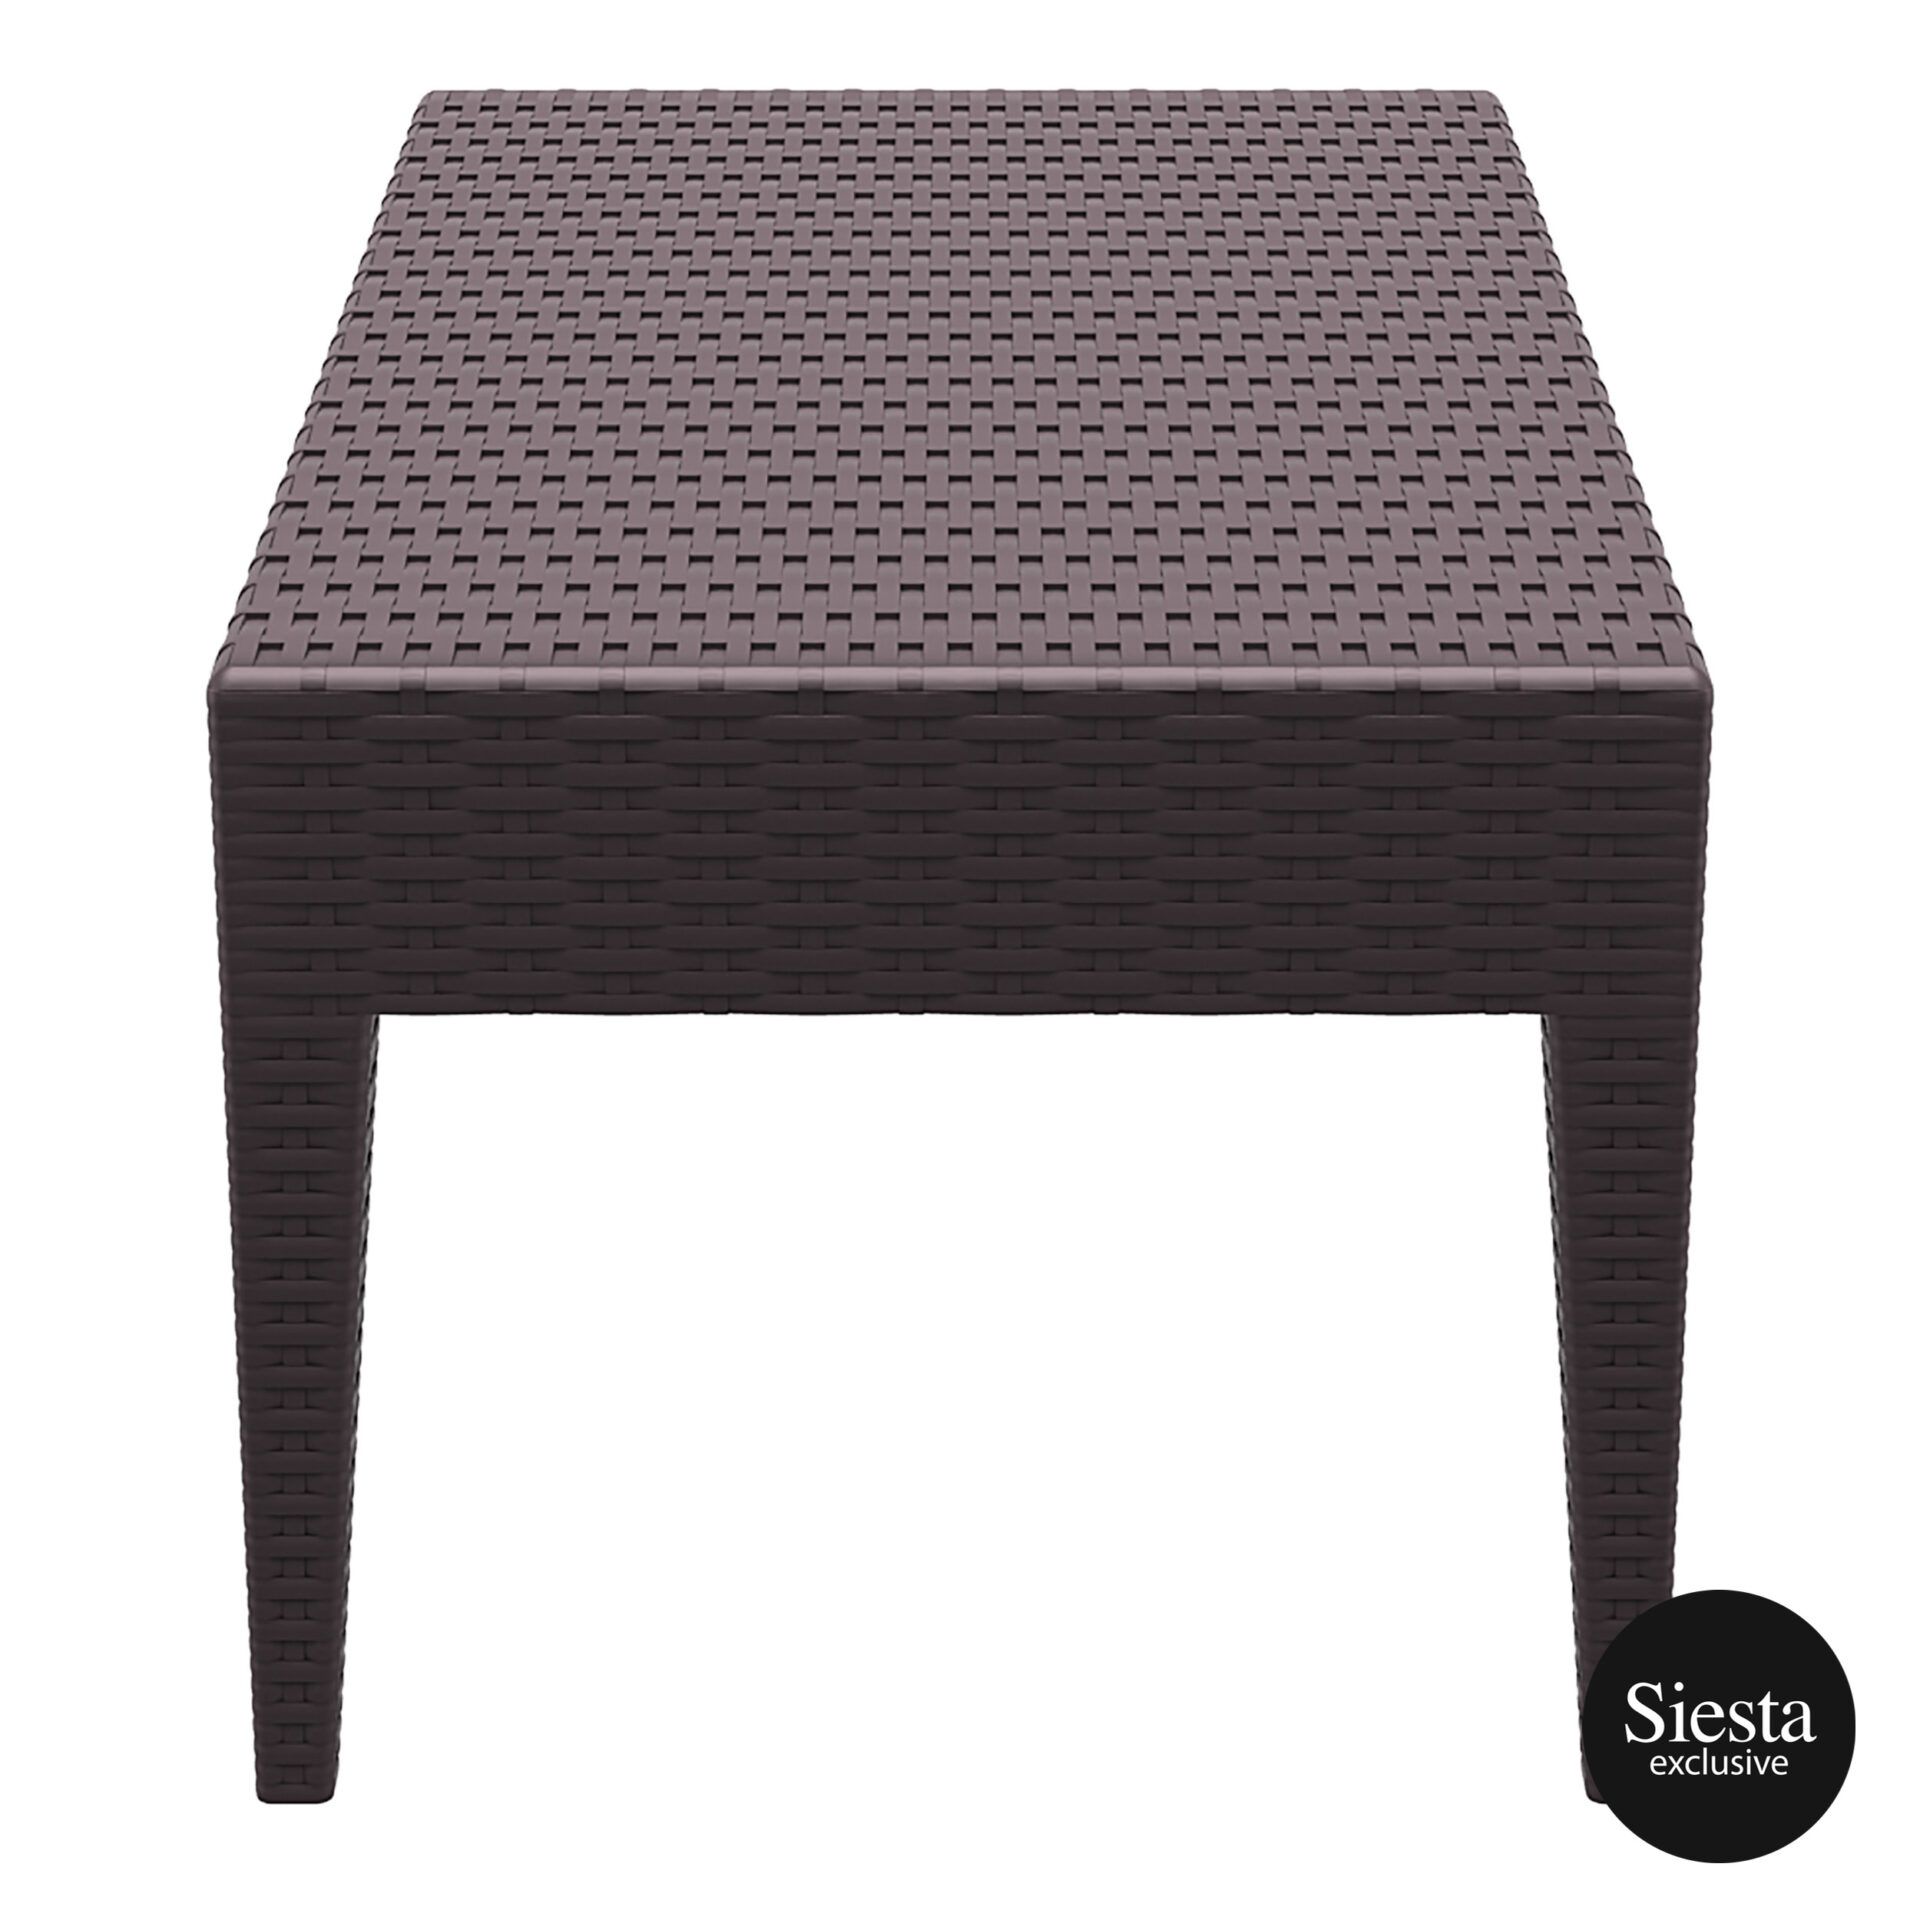 Resin Rattan Miami Tequila Lounge table brown short edge